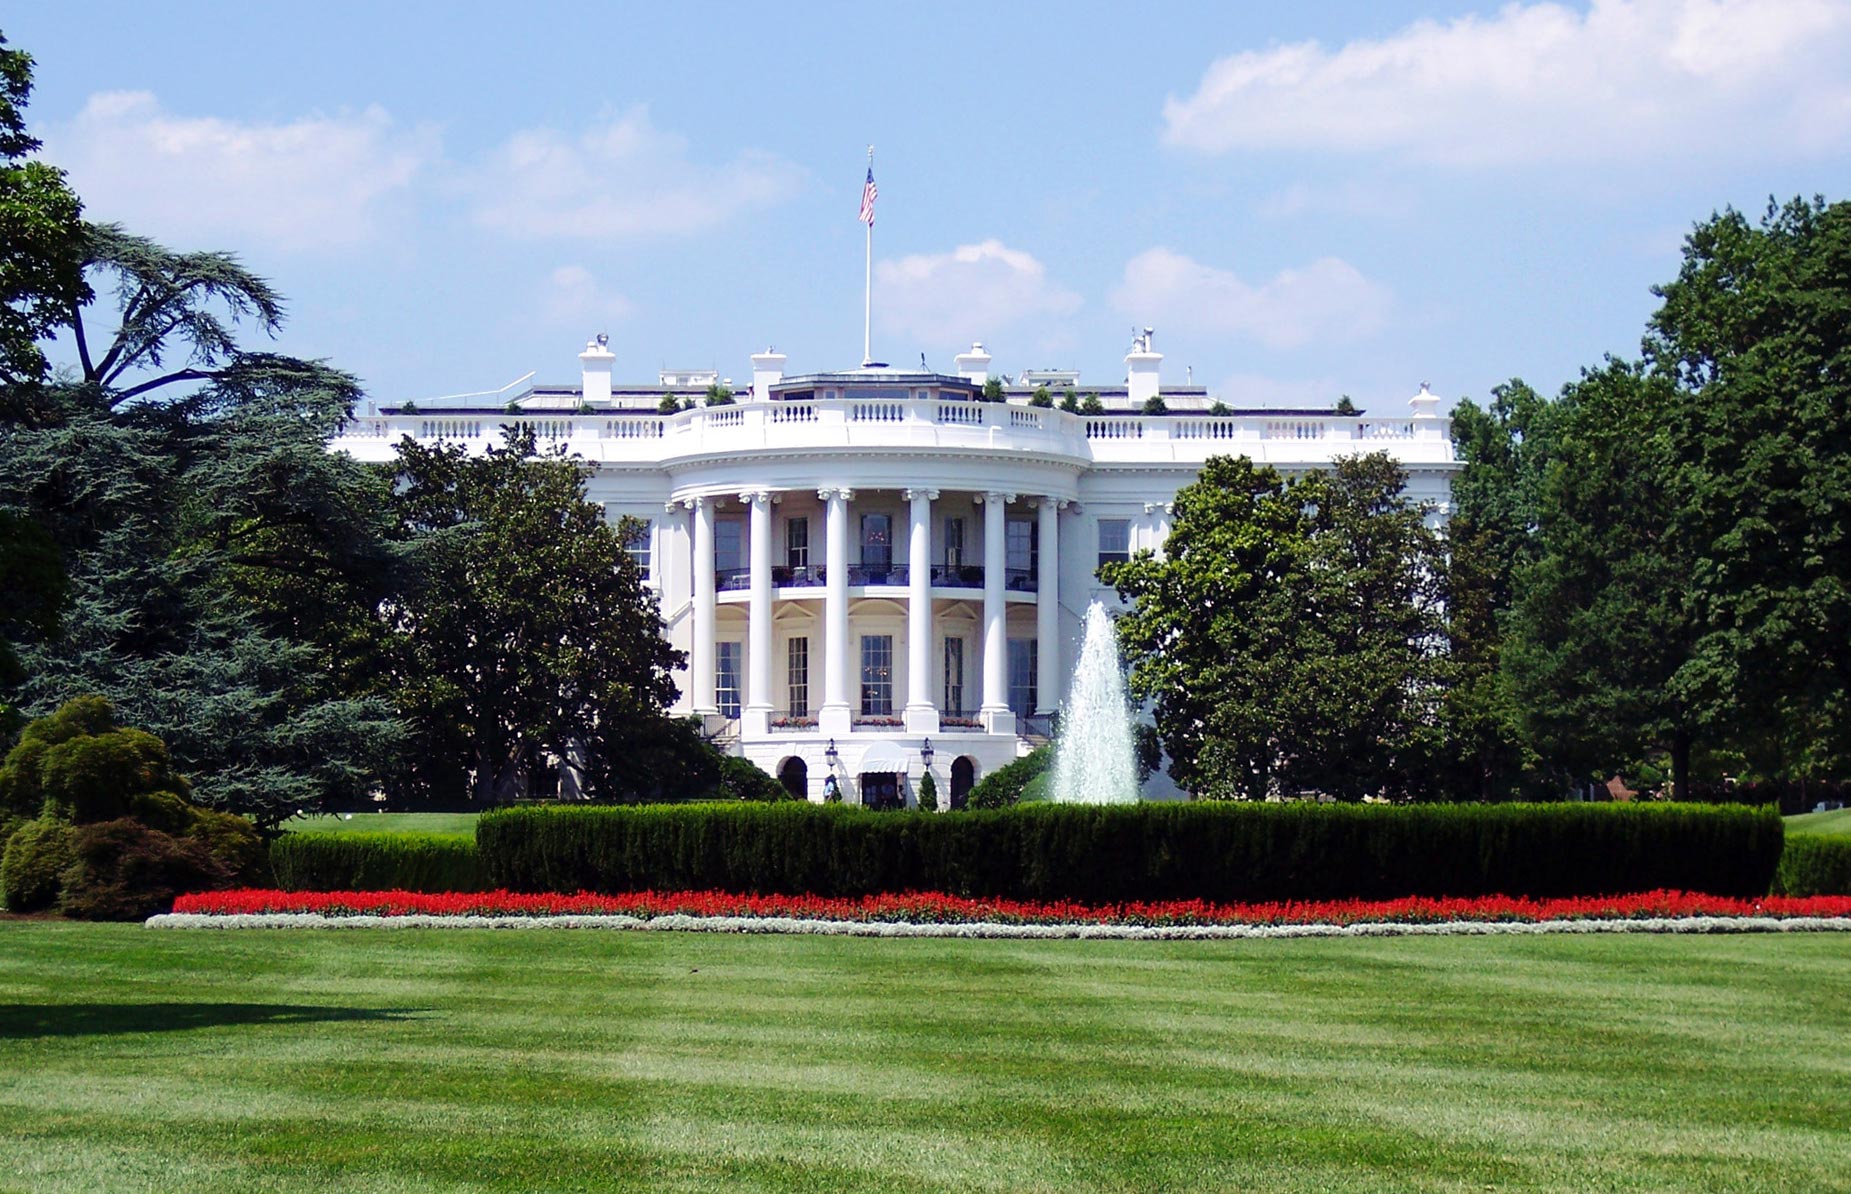 a white house with columns and a fountain in front with White House in the background